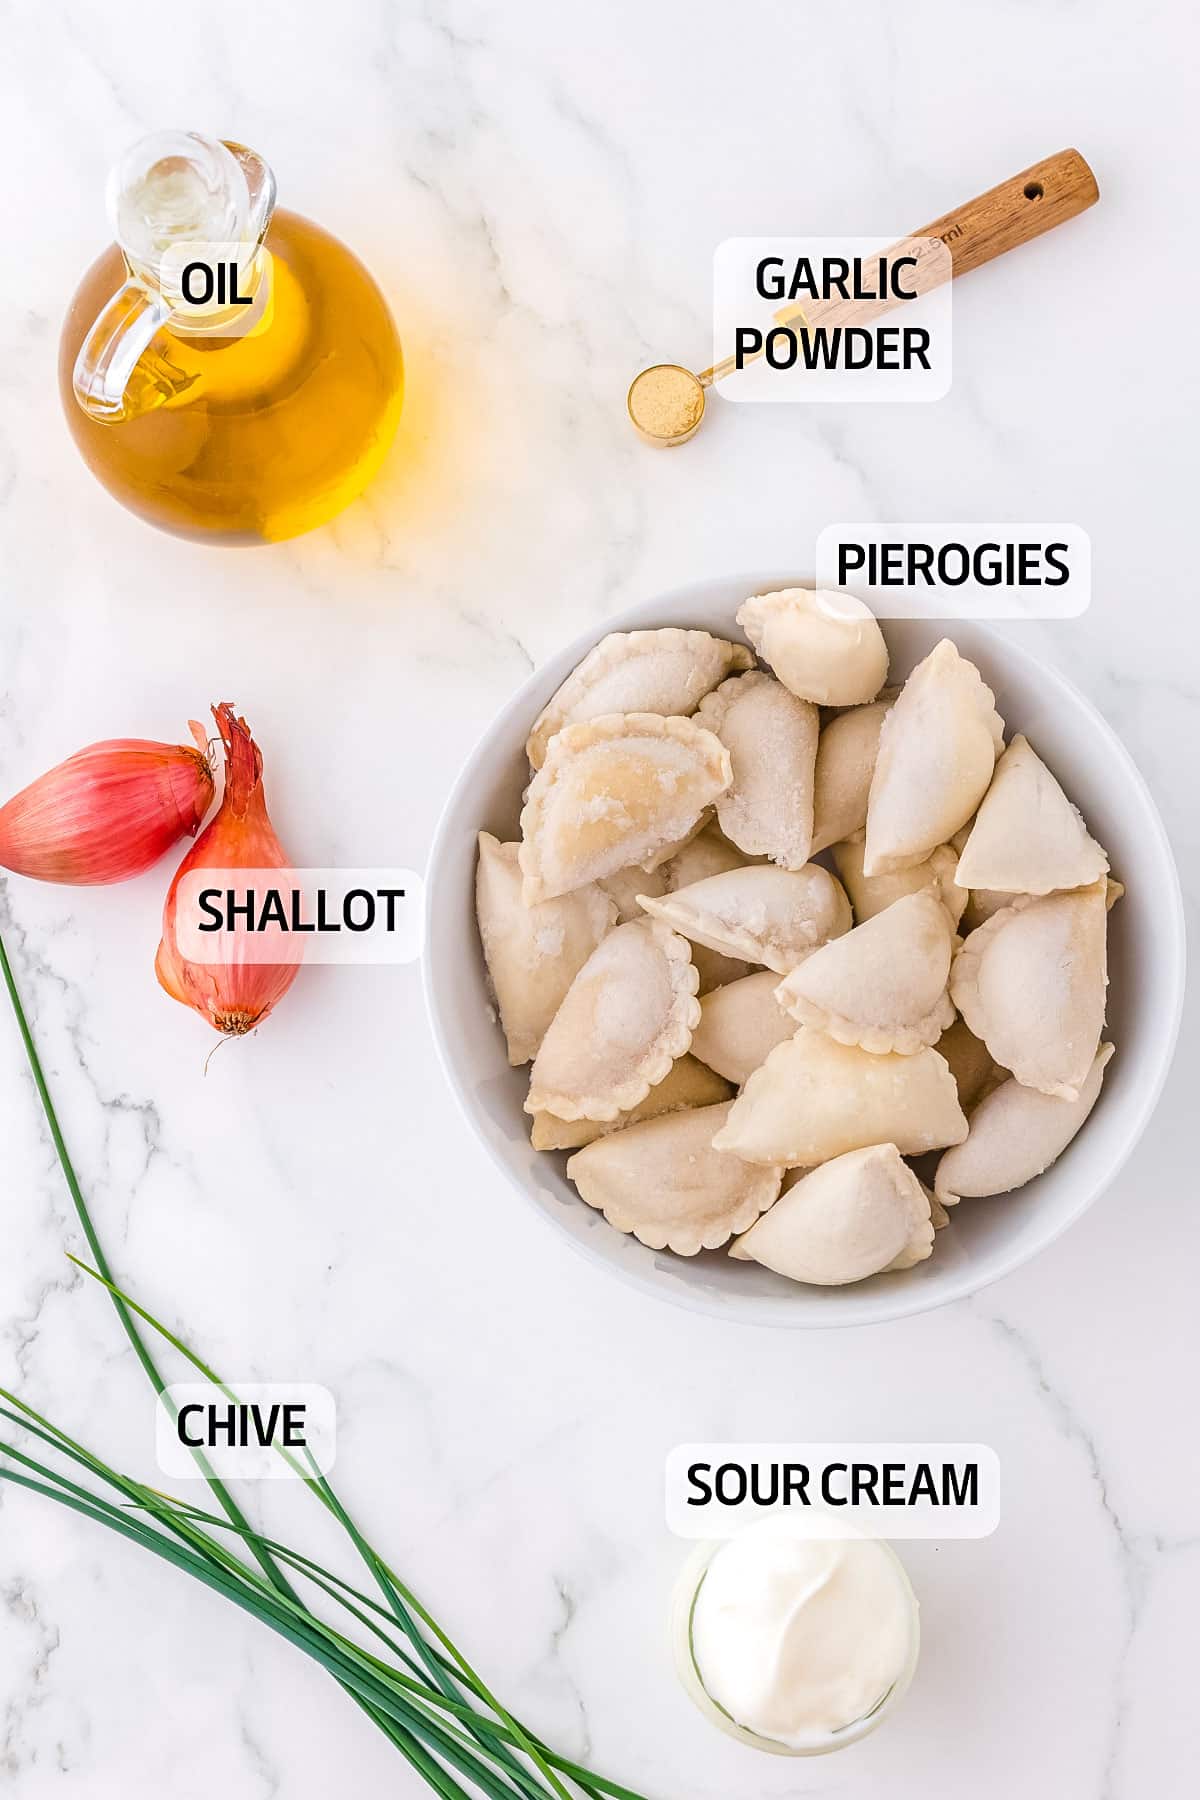 All of the ingredients needed to make this recipe.